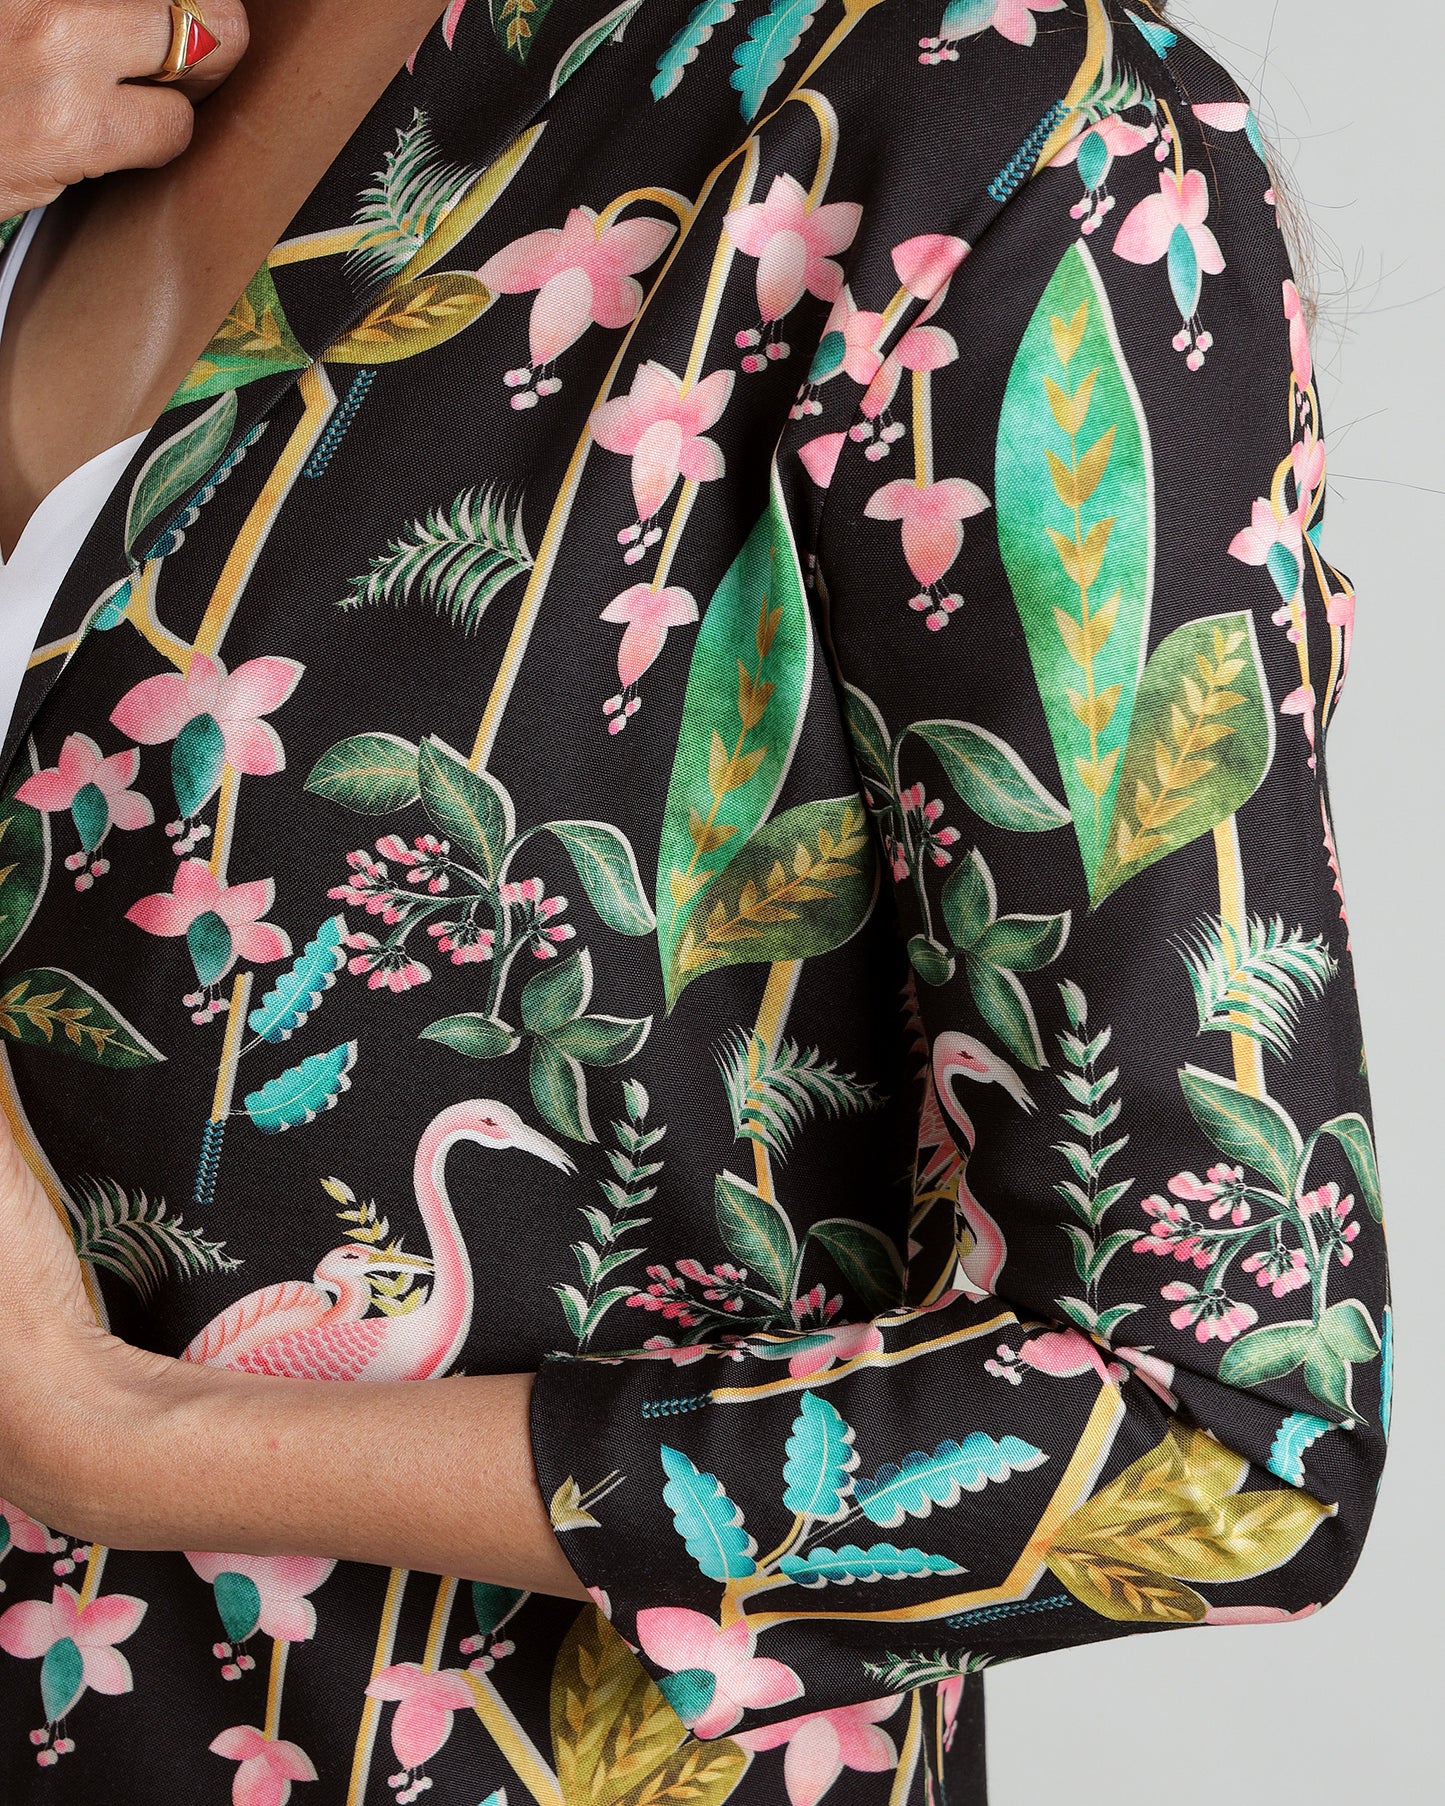 The Jacket That Tells a Story: A Vintage Floral Dream